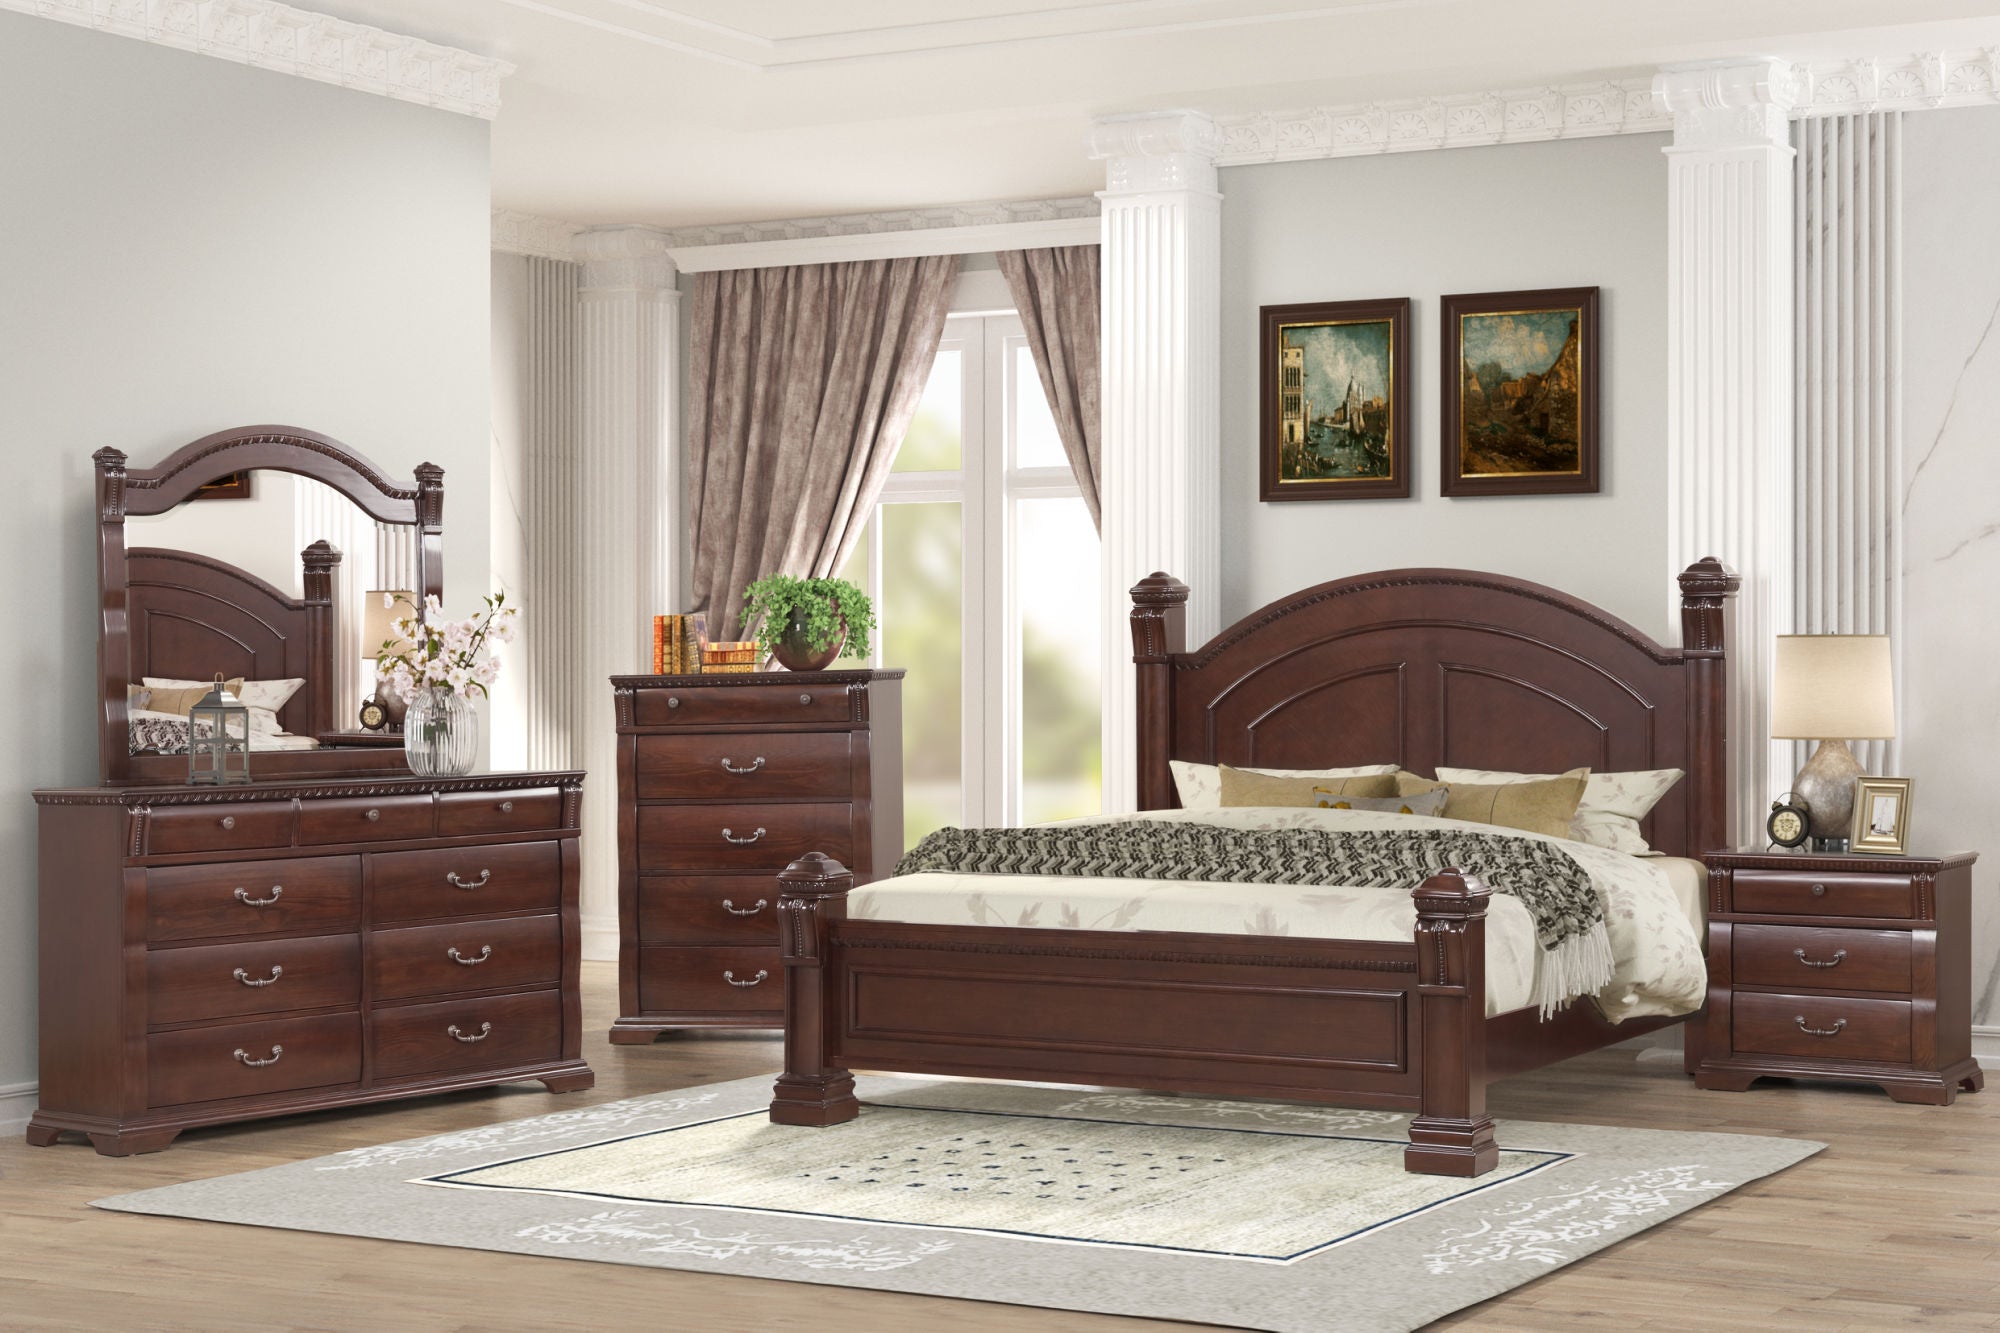 Aspen Queen 5 Pc Traditional Bedroom set made with Wood in Cherry